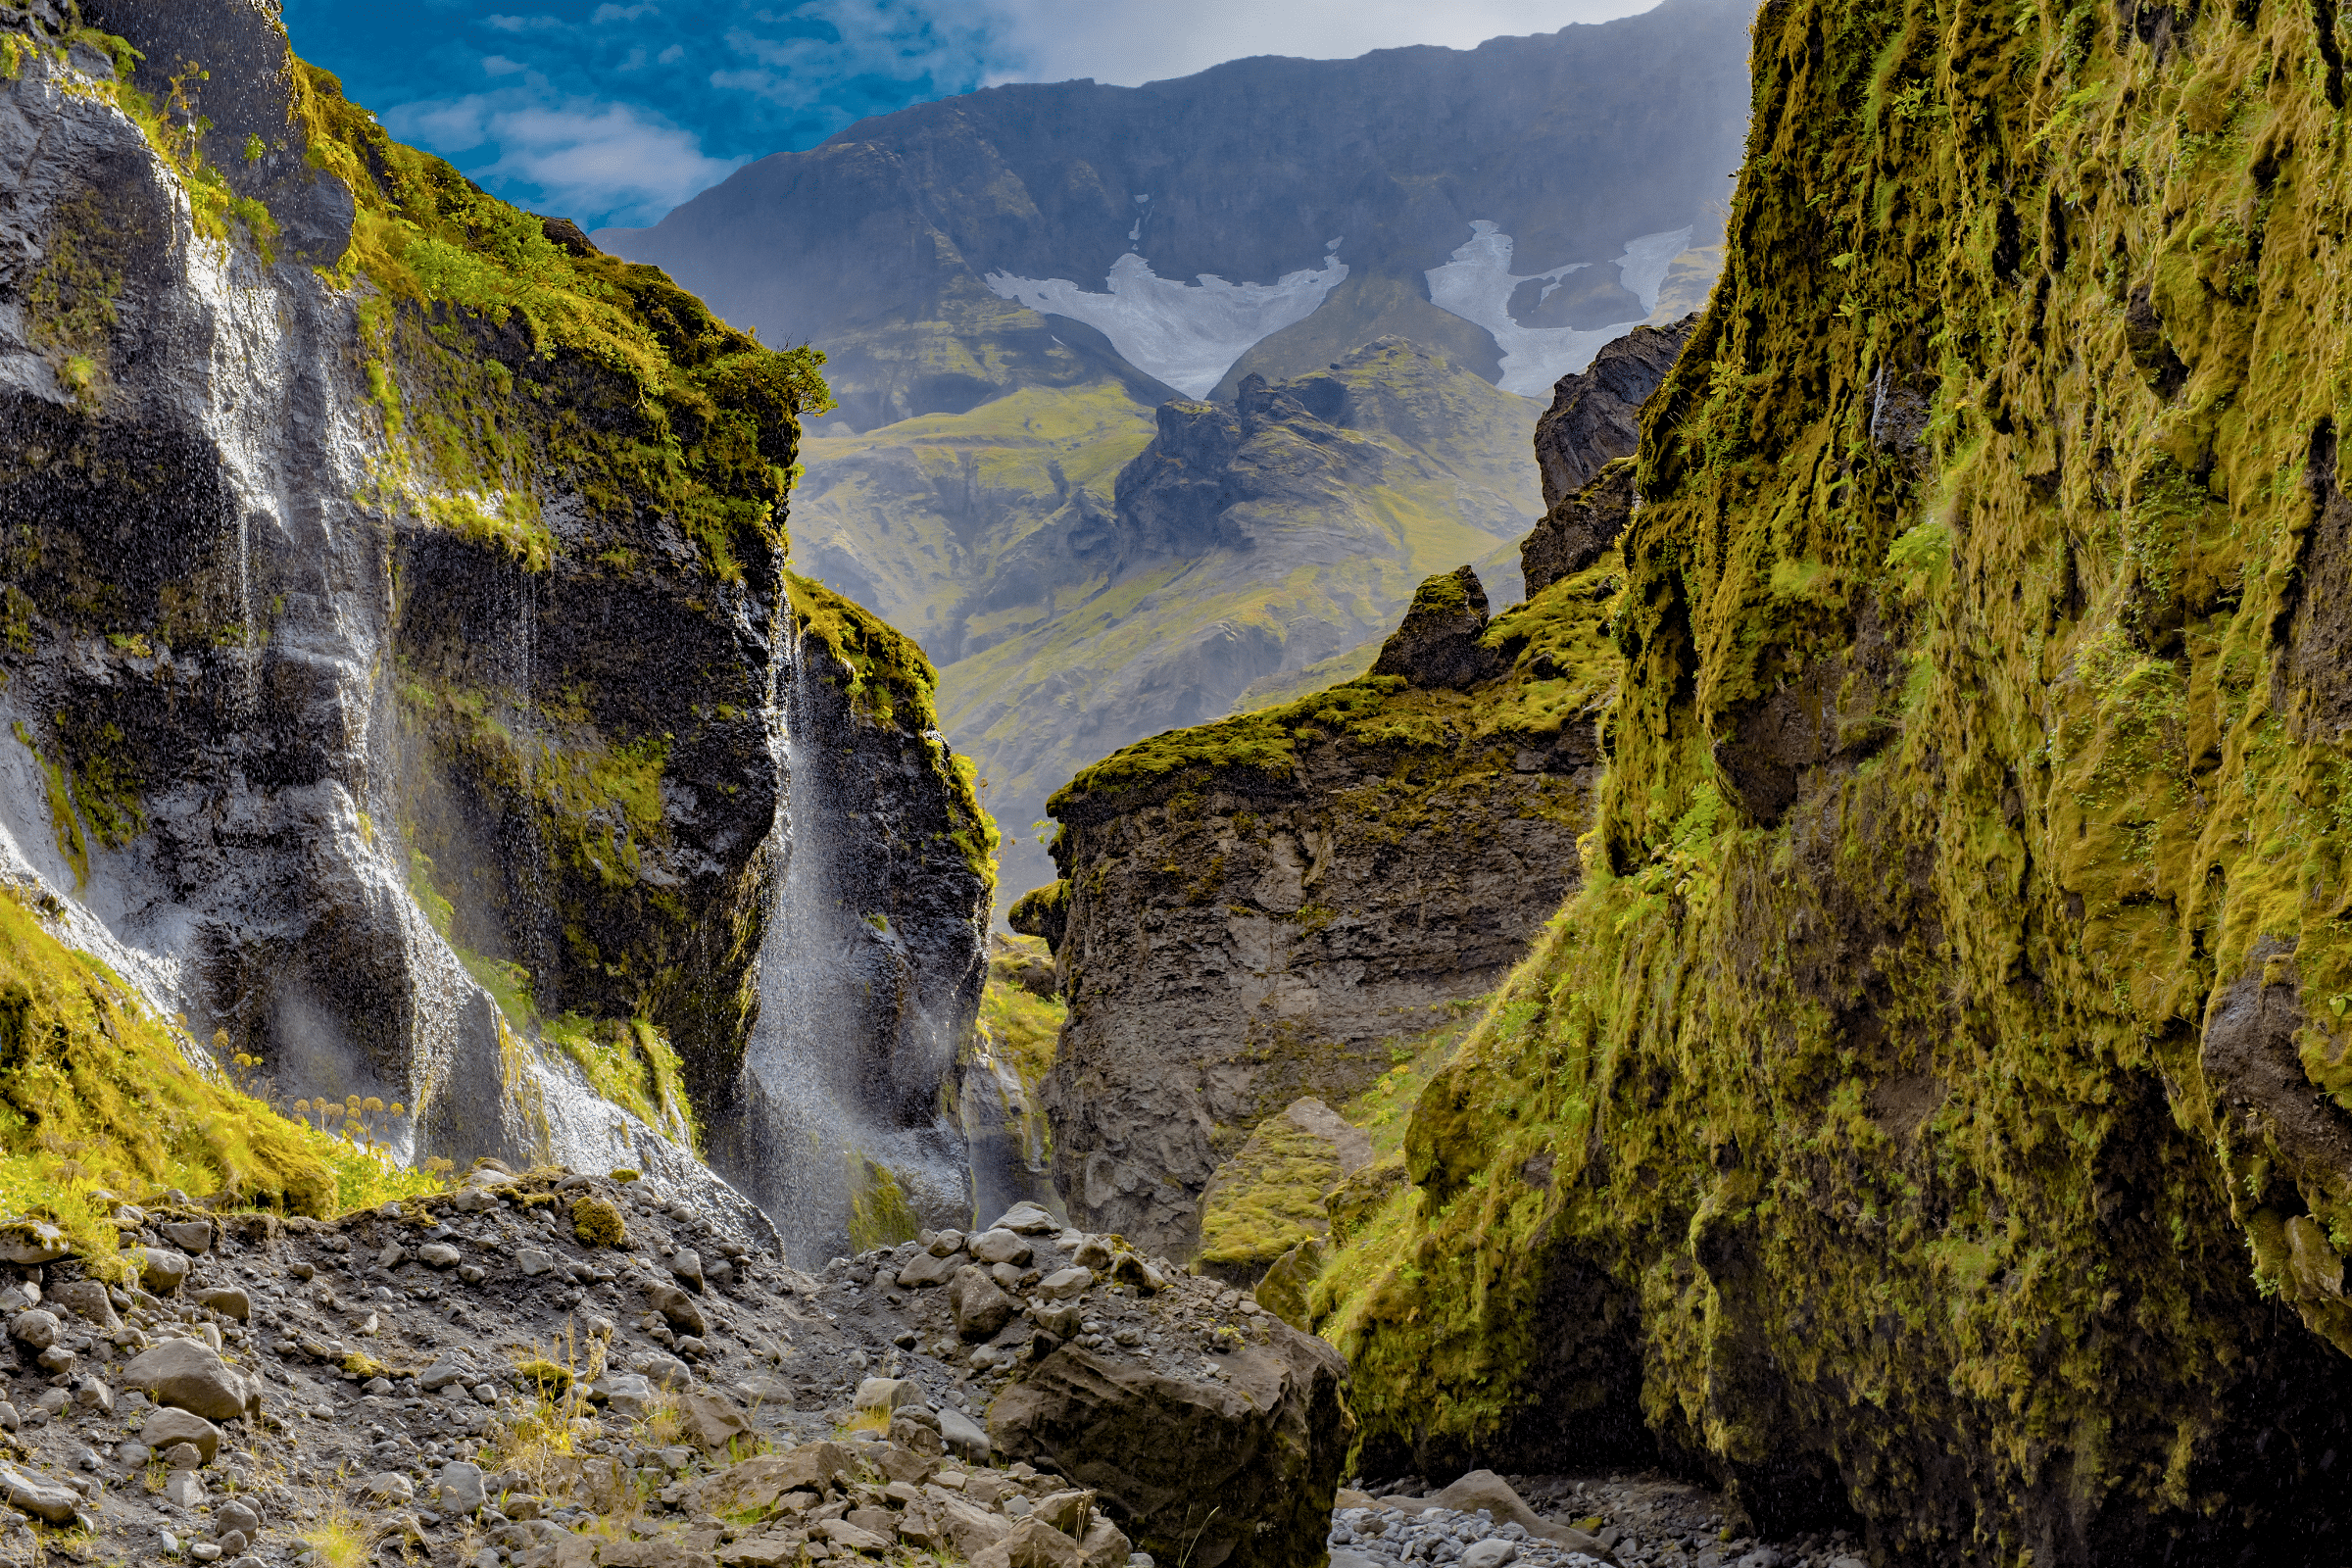 Cascades of white water from the glacier in Stakkholtsgja canyon, Iceland.